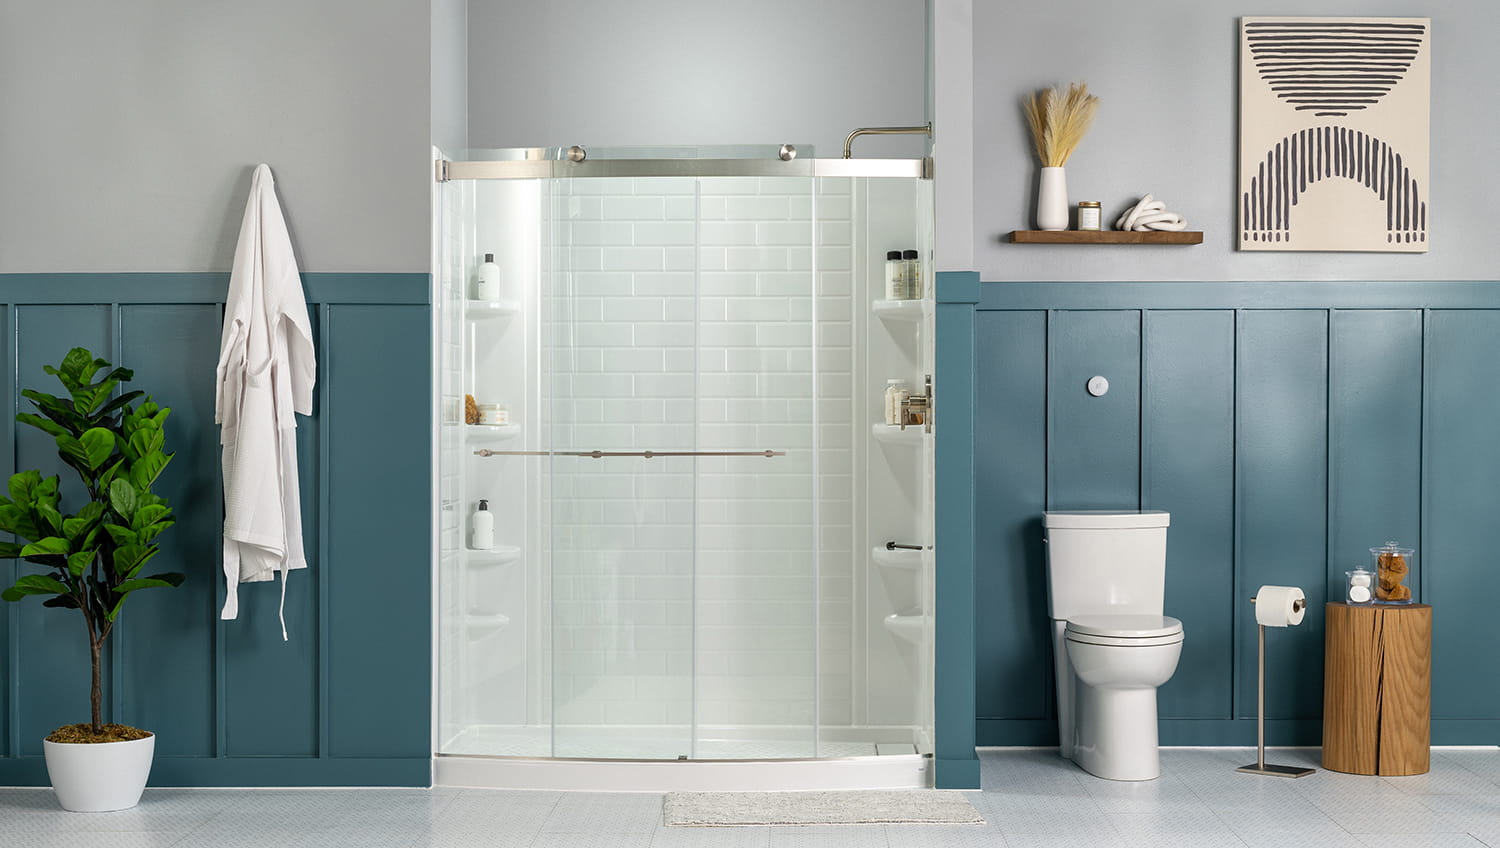 Elevate Bathroom Collection by American Standard